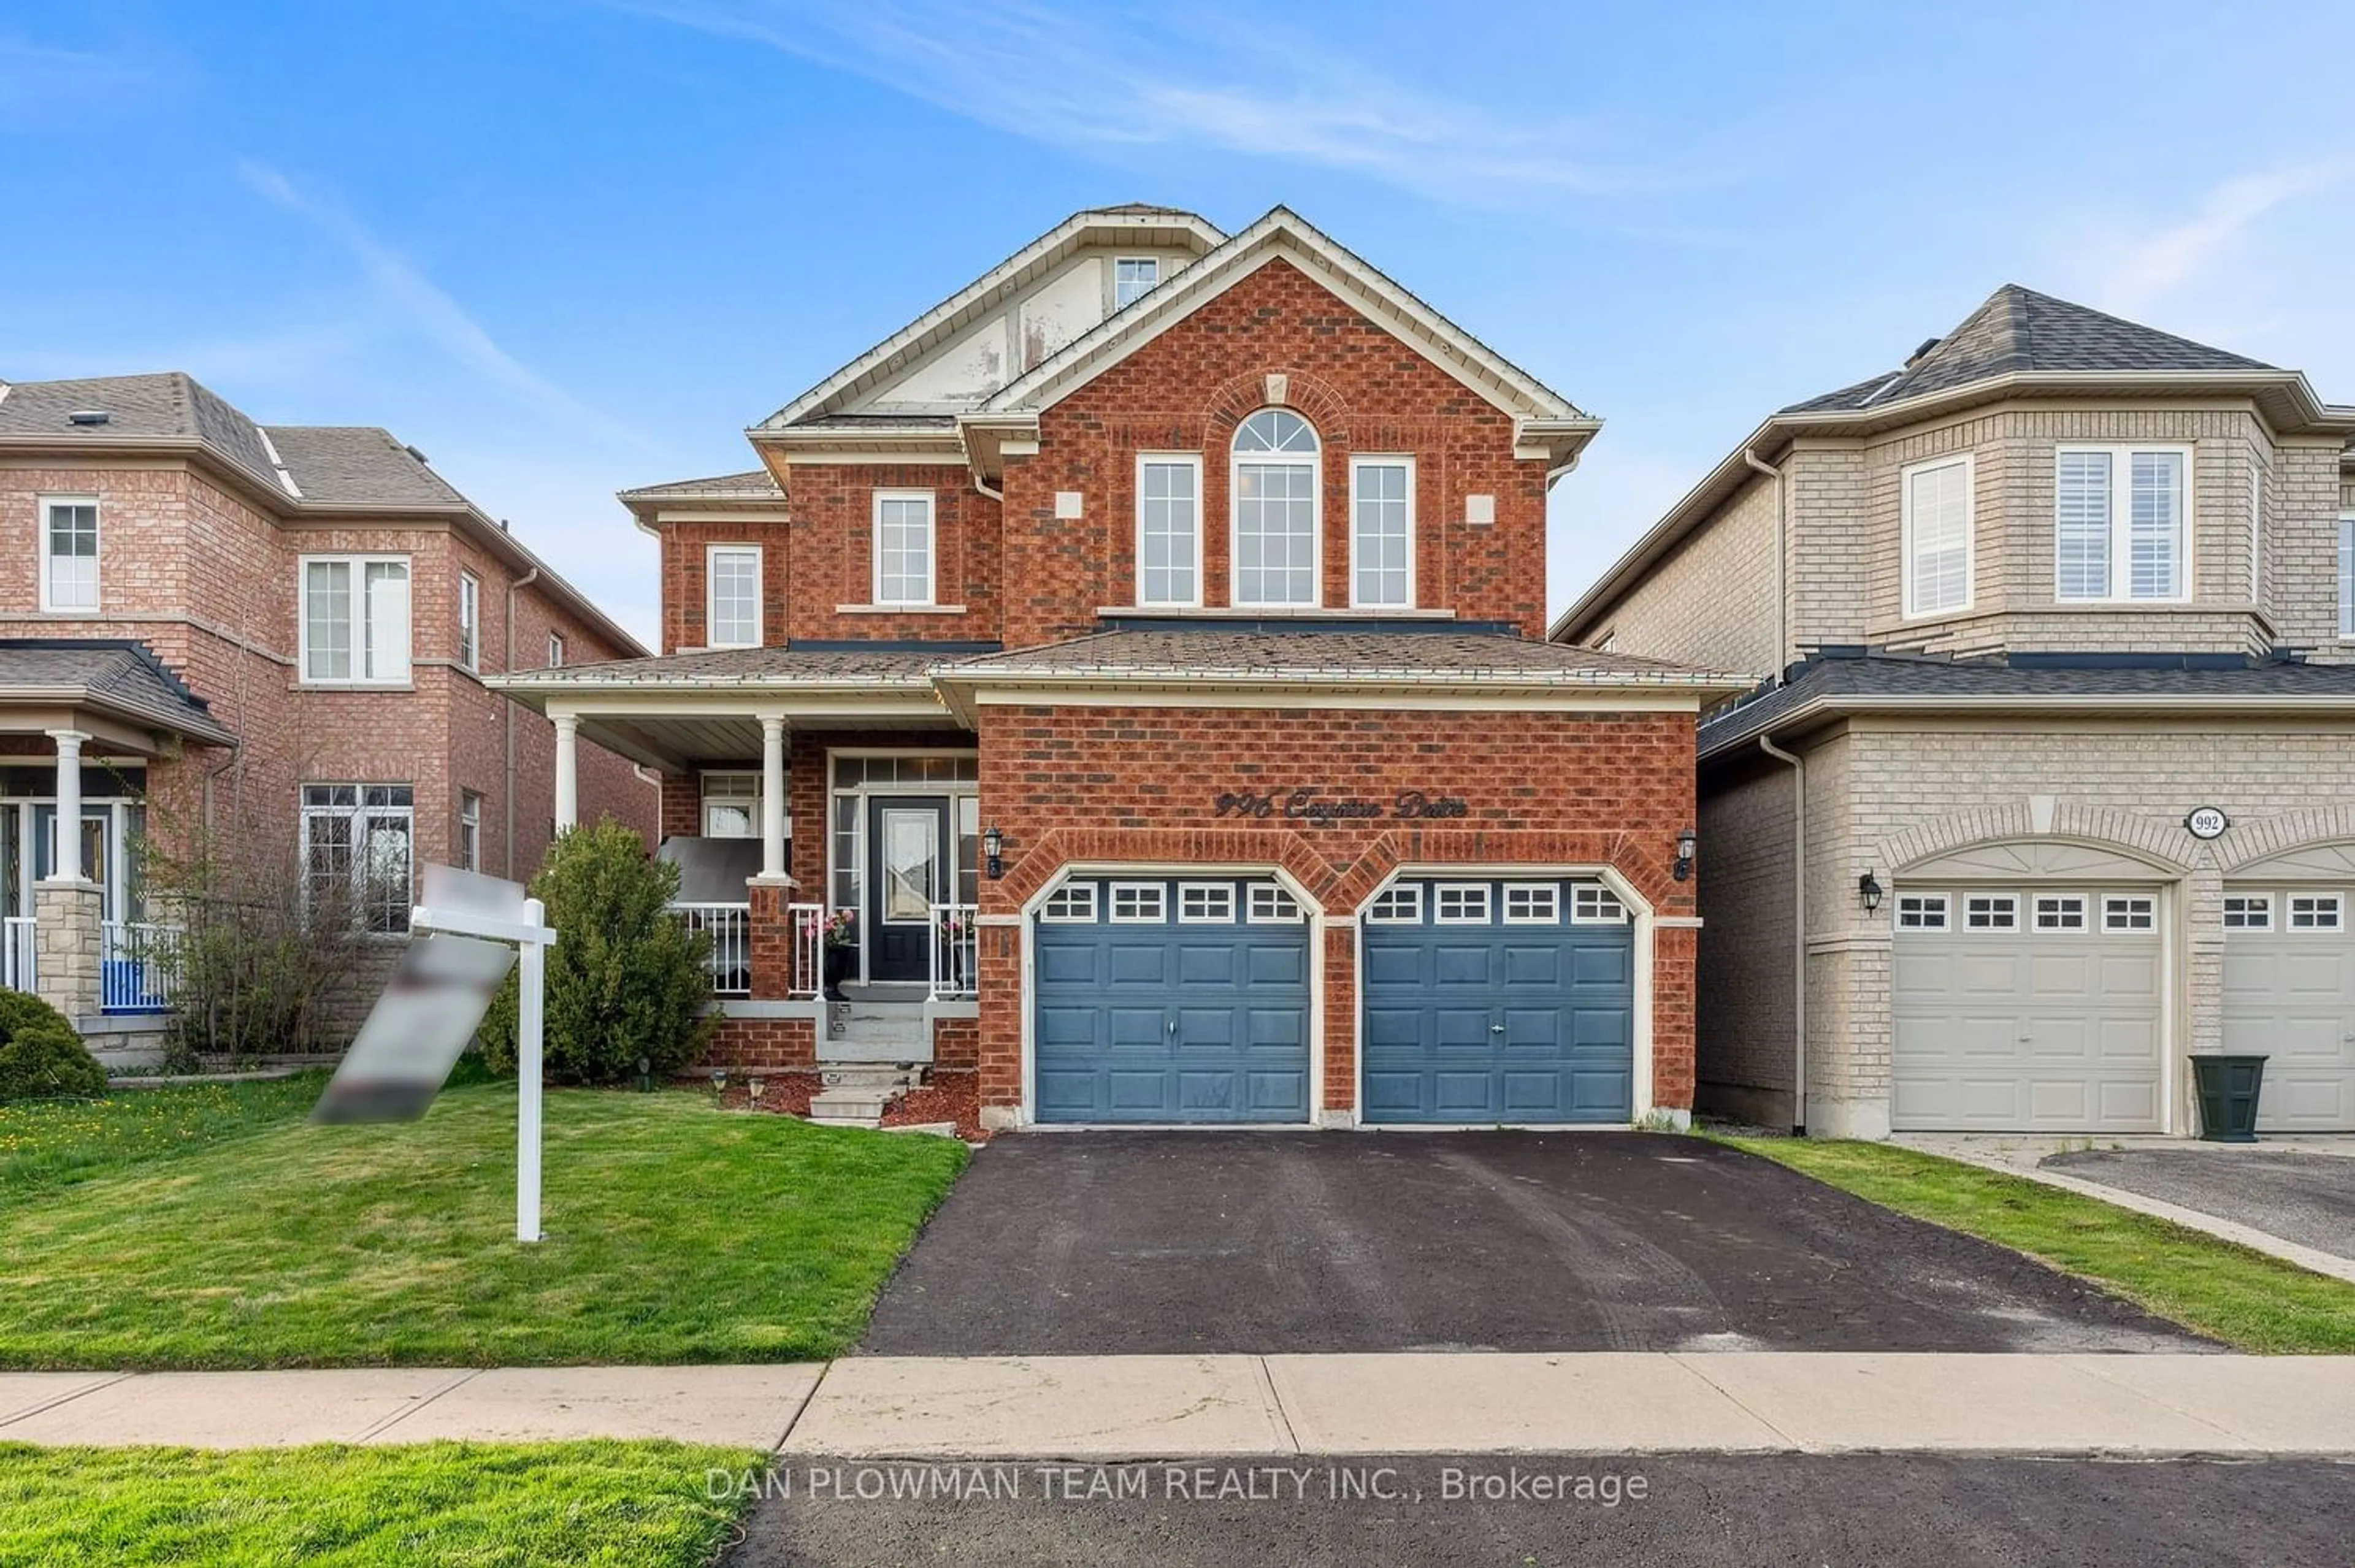 Home with brick exterior material for 996 Coyston Dr, Oshawa Ontario L1K 3C4